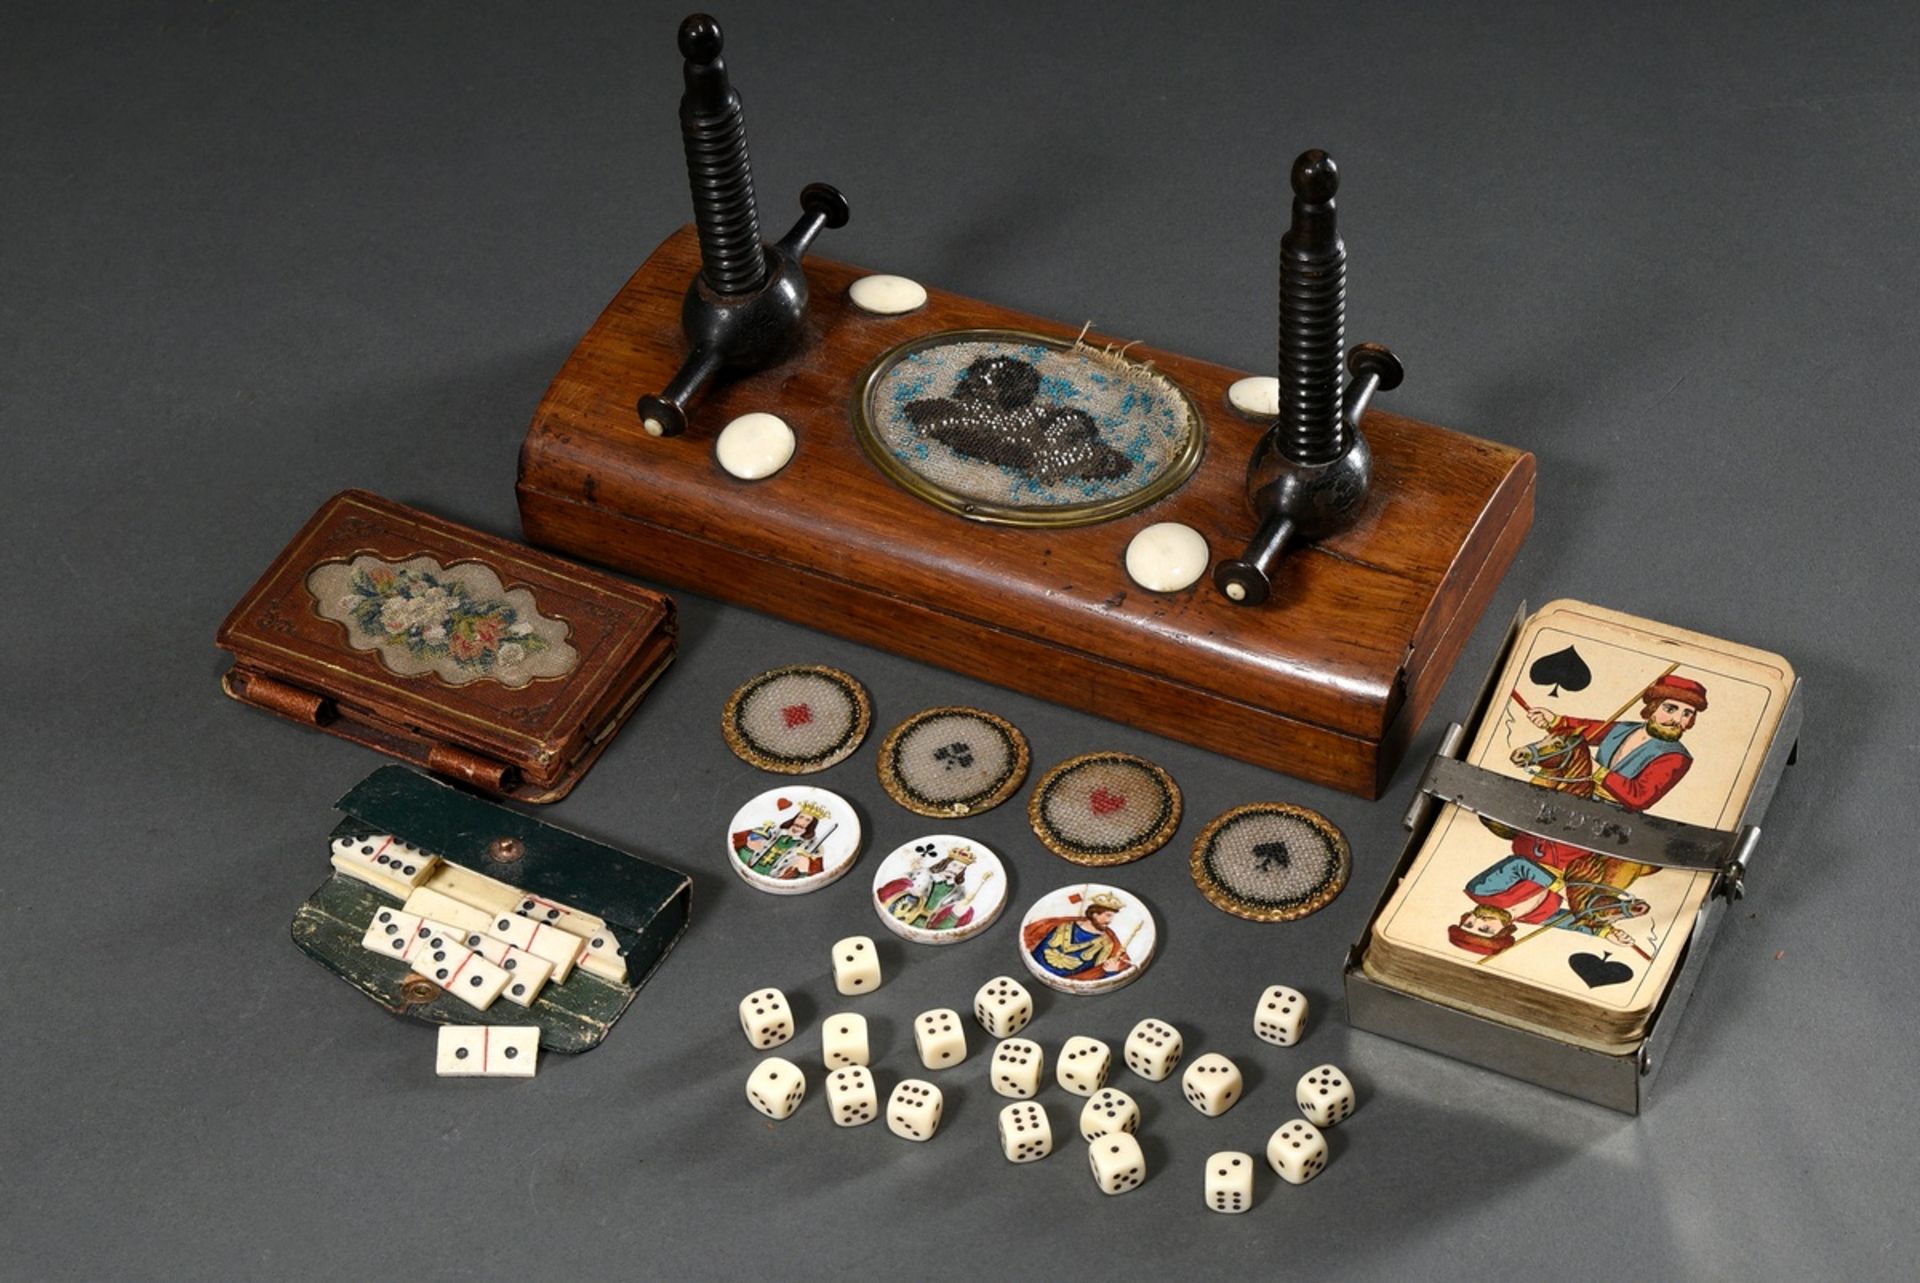 29 Various pieces of playing utensils: 4 pearl playing chips in leather case with floral embroidery